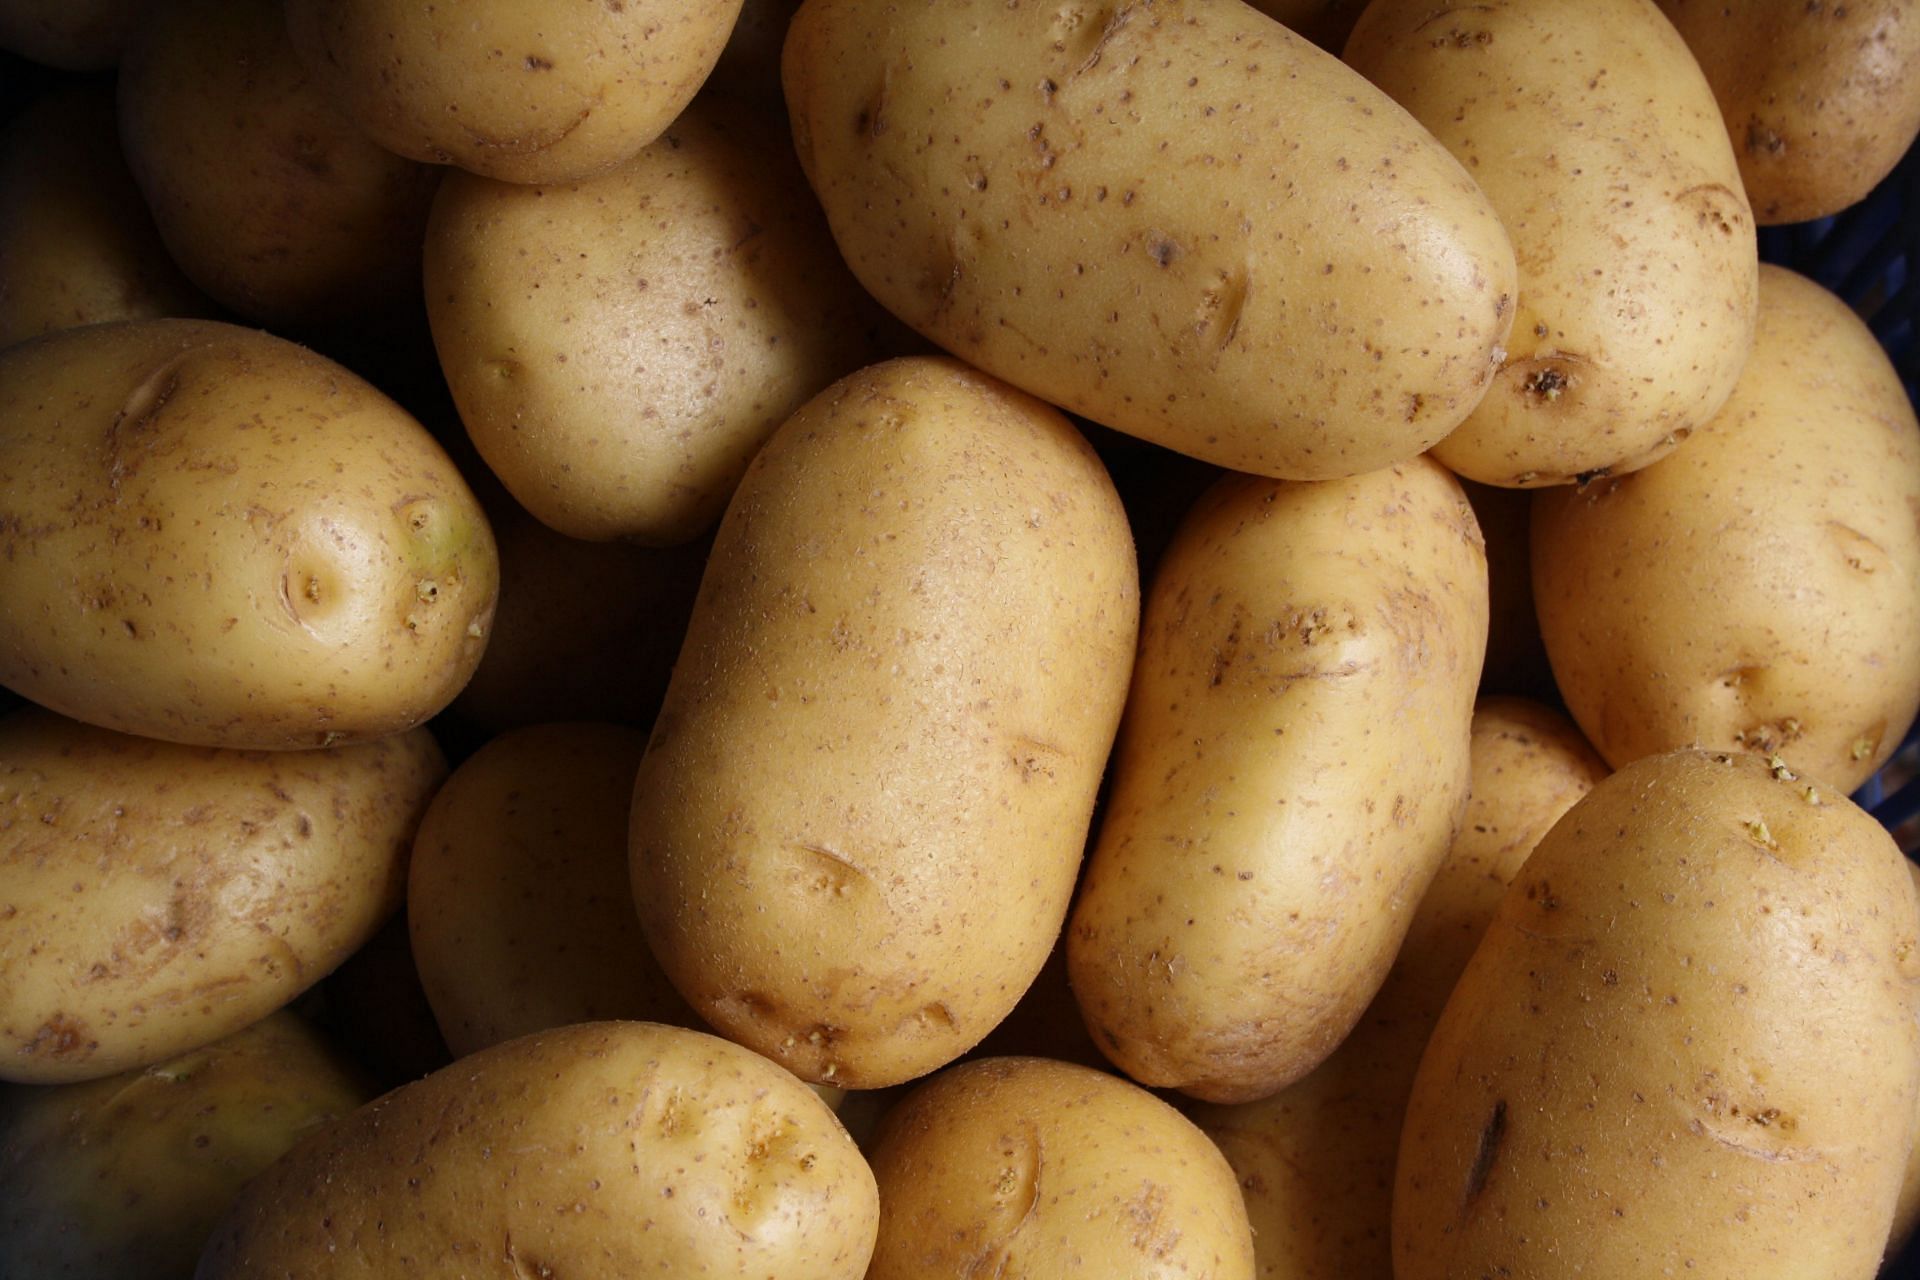 Potatoes are high in their carb content. (Image via Unsplash/Lars Blankers)